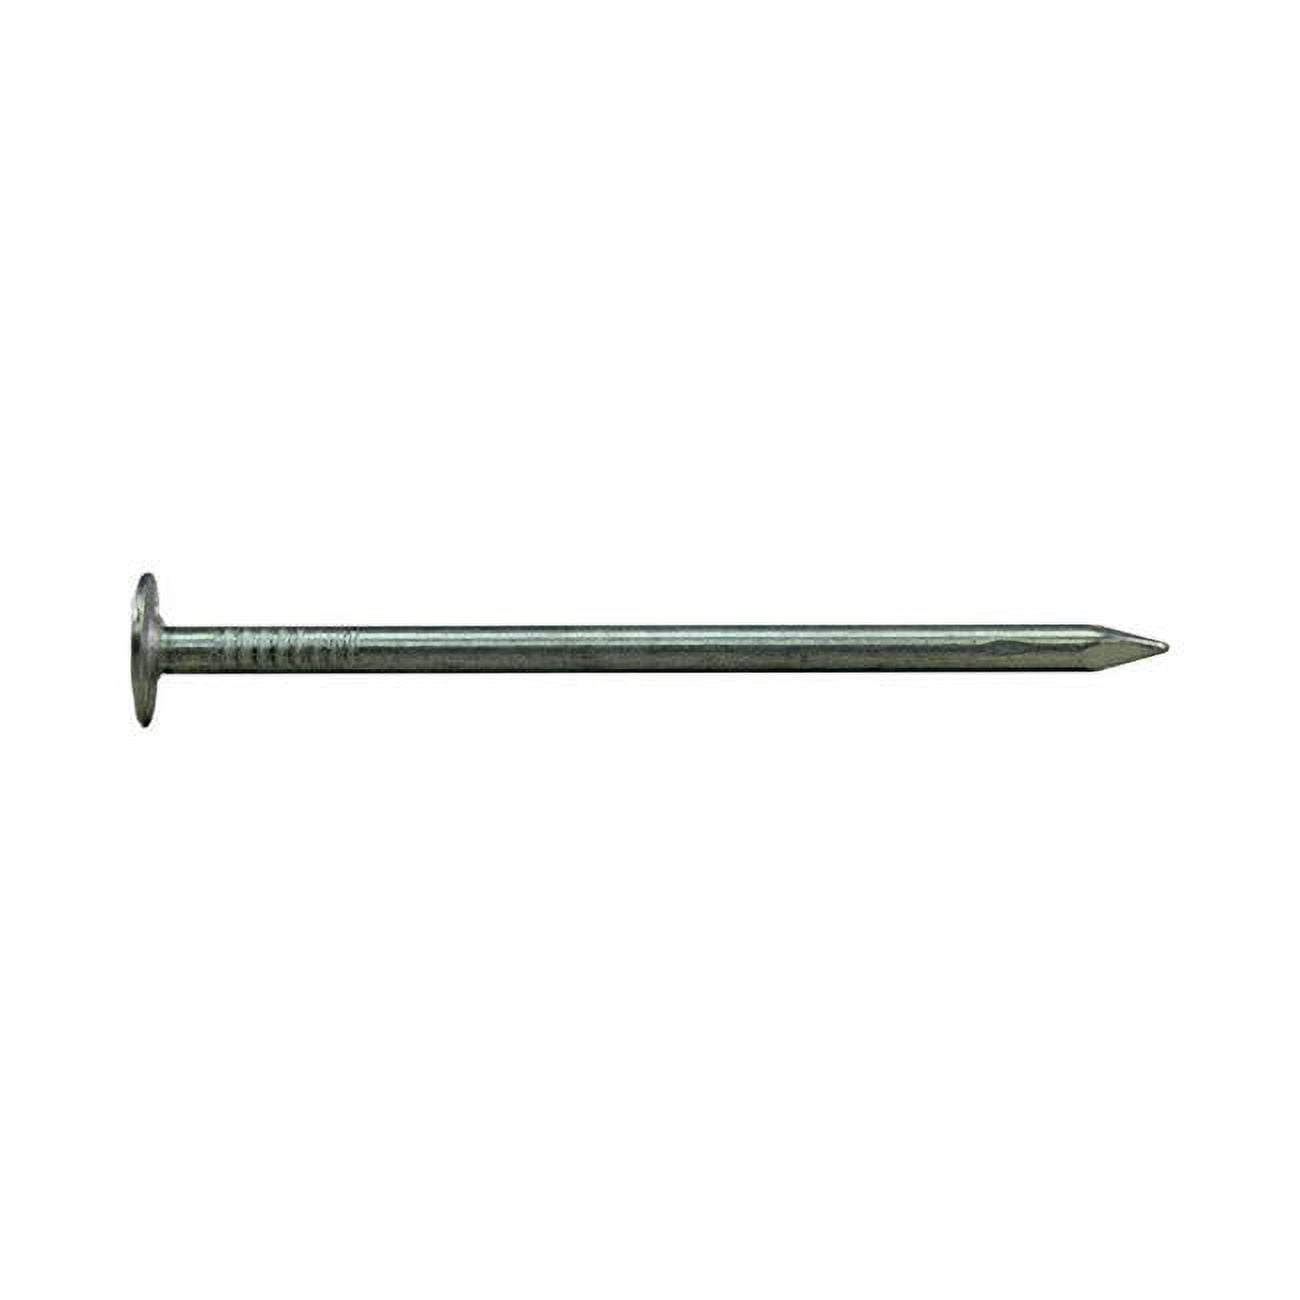 National Nail 5693098 1 in. 1 lbs EG Roofing Nail